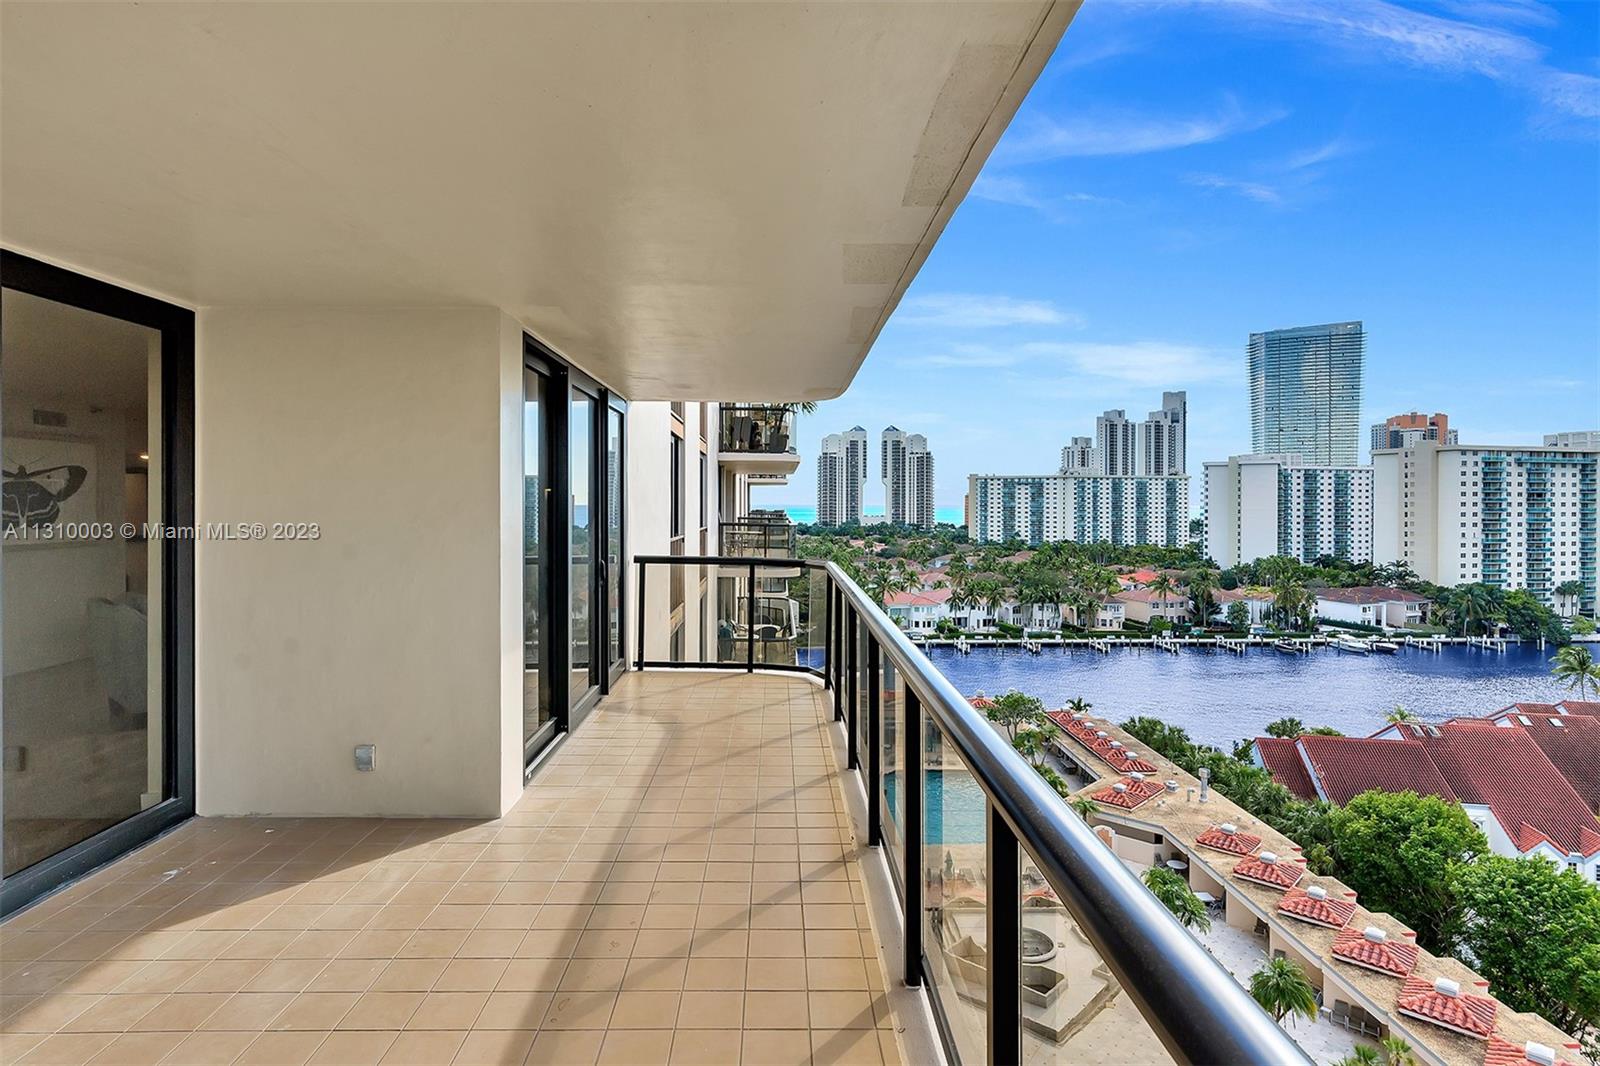 Photo 76 of Turnberry Isle South Cond Apt 11D in Aventura - MLS A11310003